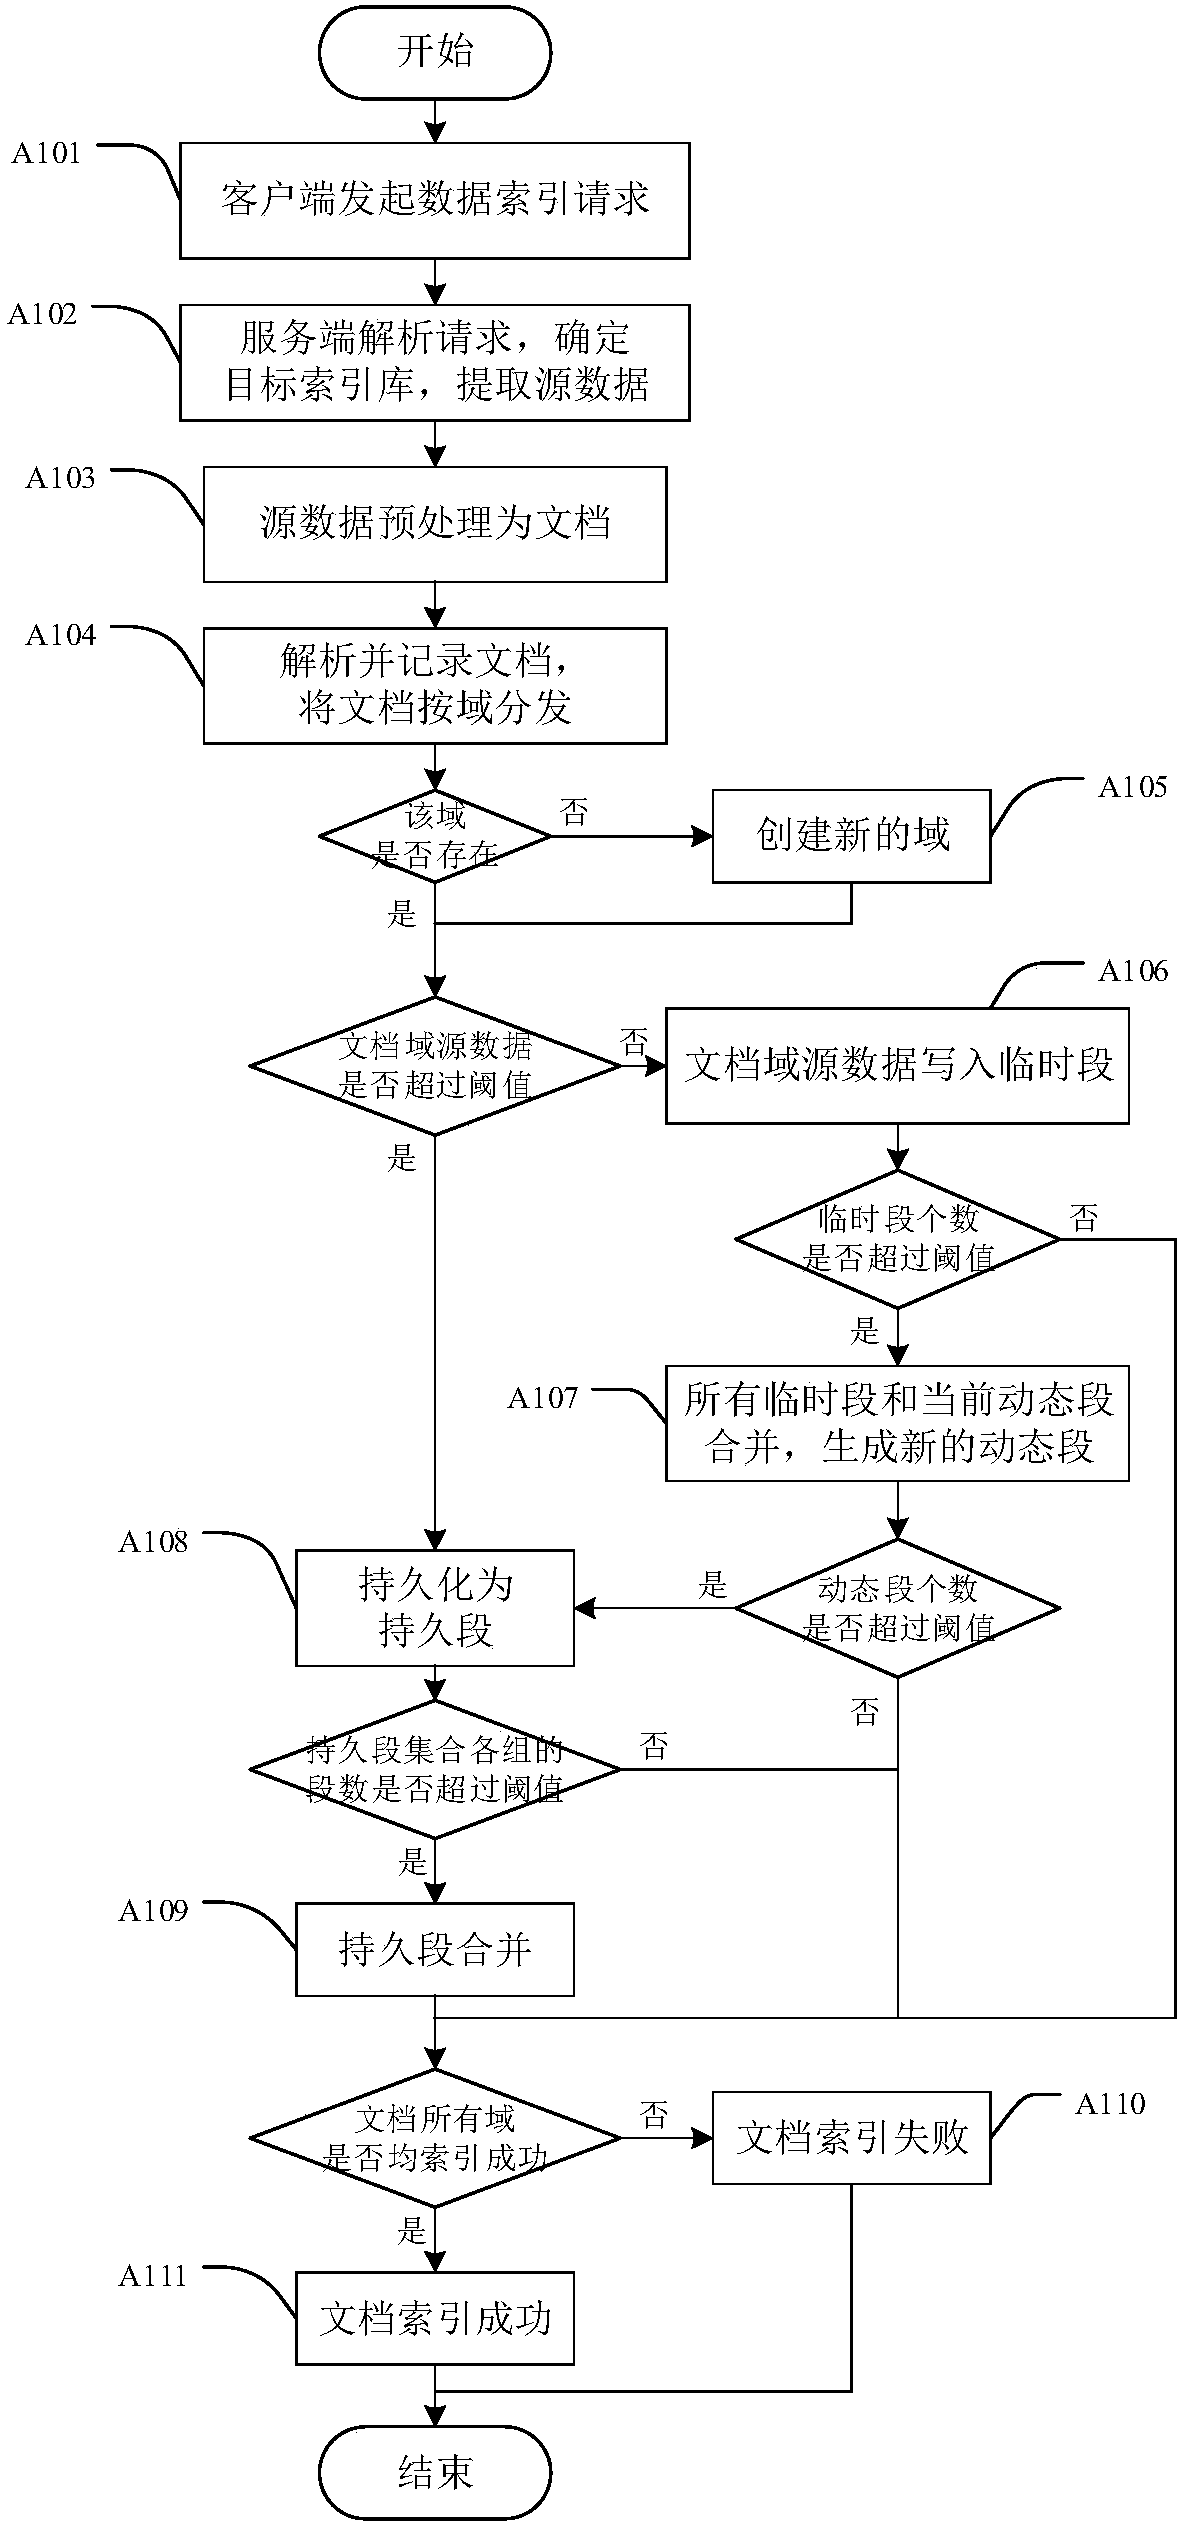 A suffix array indexing method and apparatus for real-time data stream